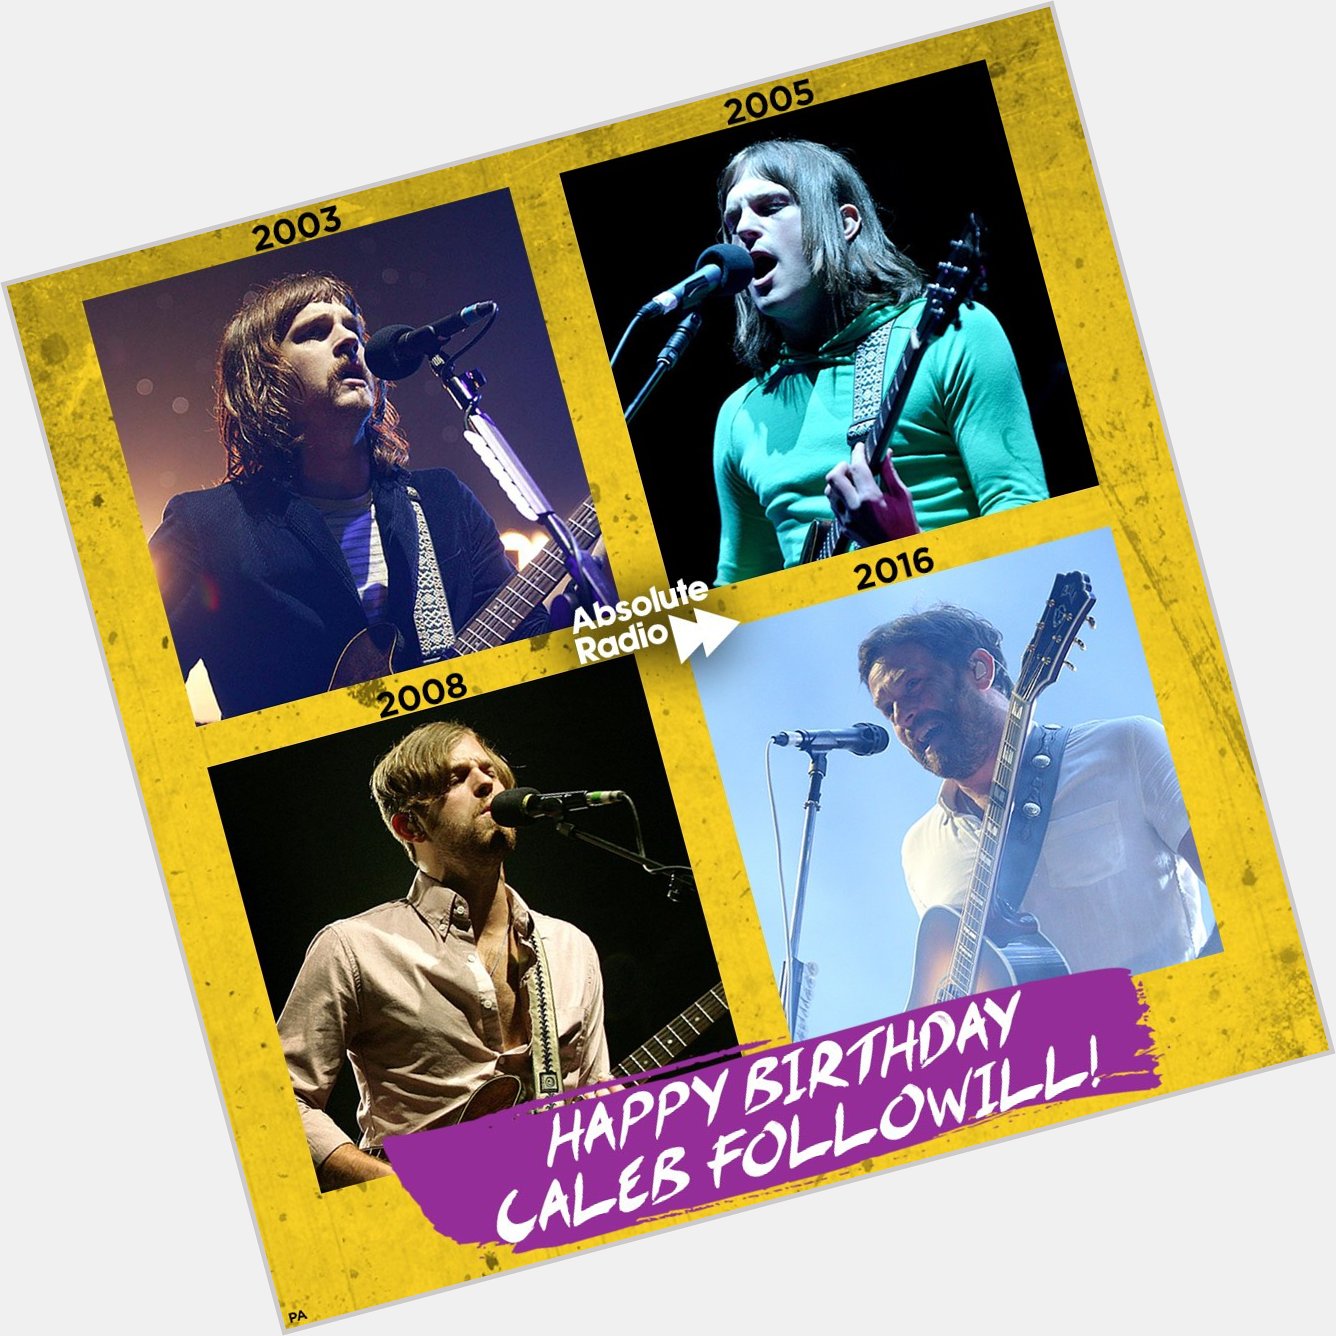 Happy birthday to Caleb Followill of One man, many hairstyles... 